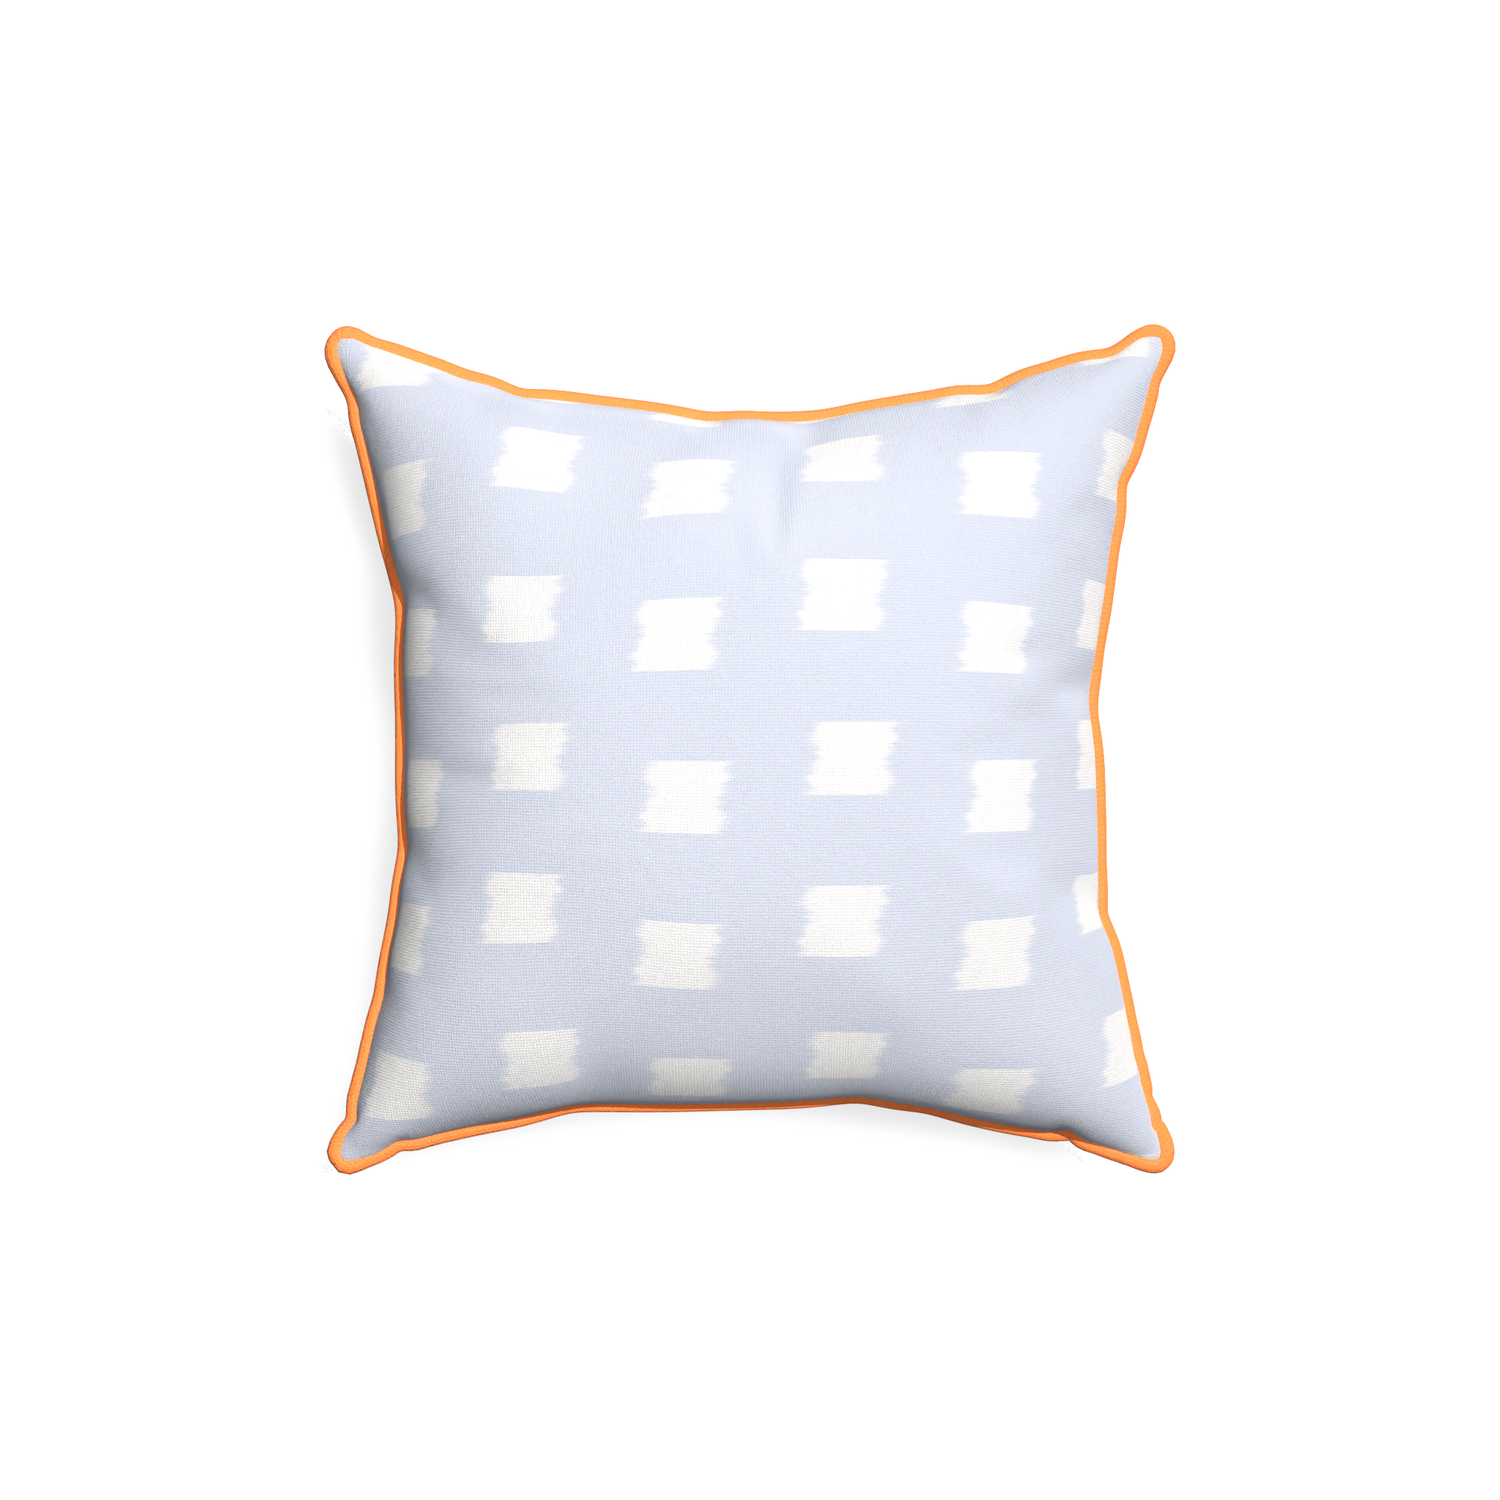 18-square denton custom pillow with clementine piping on white background